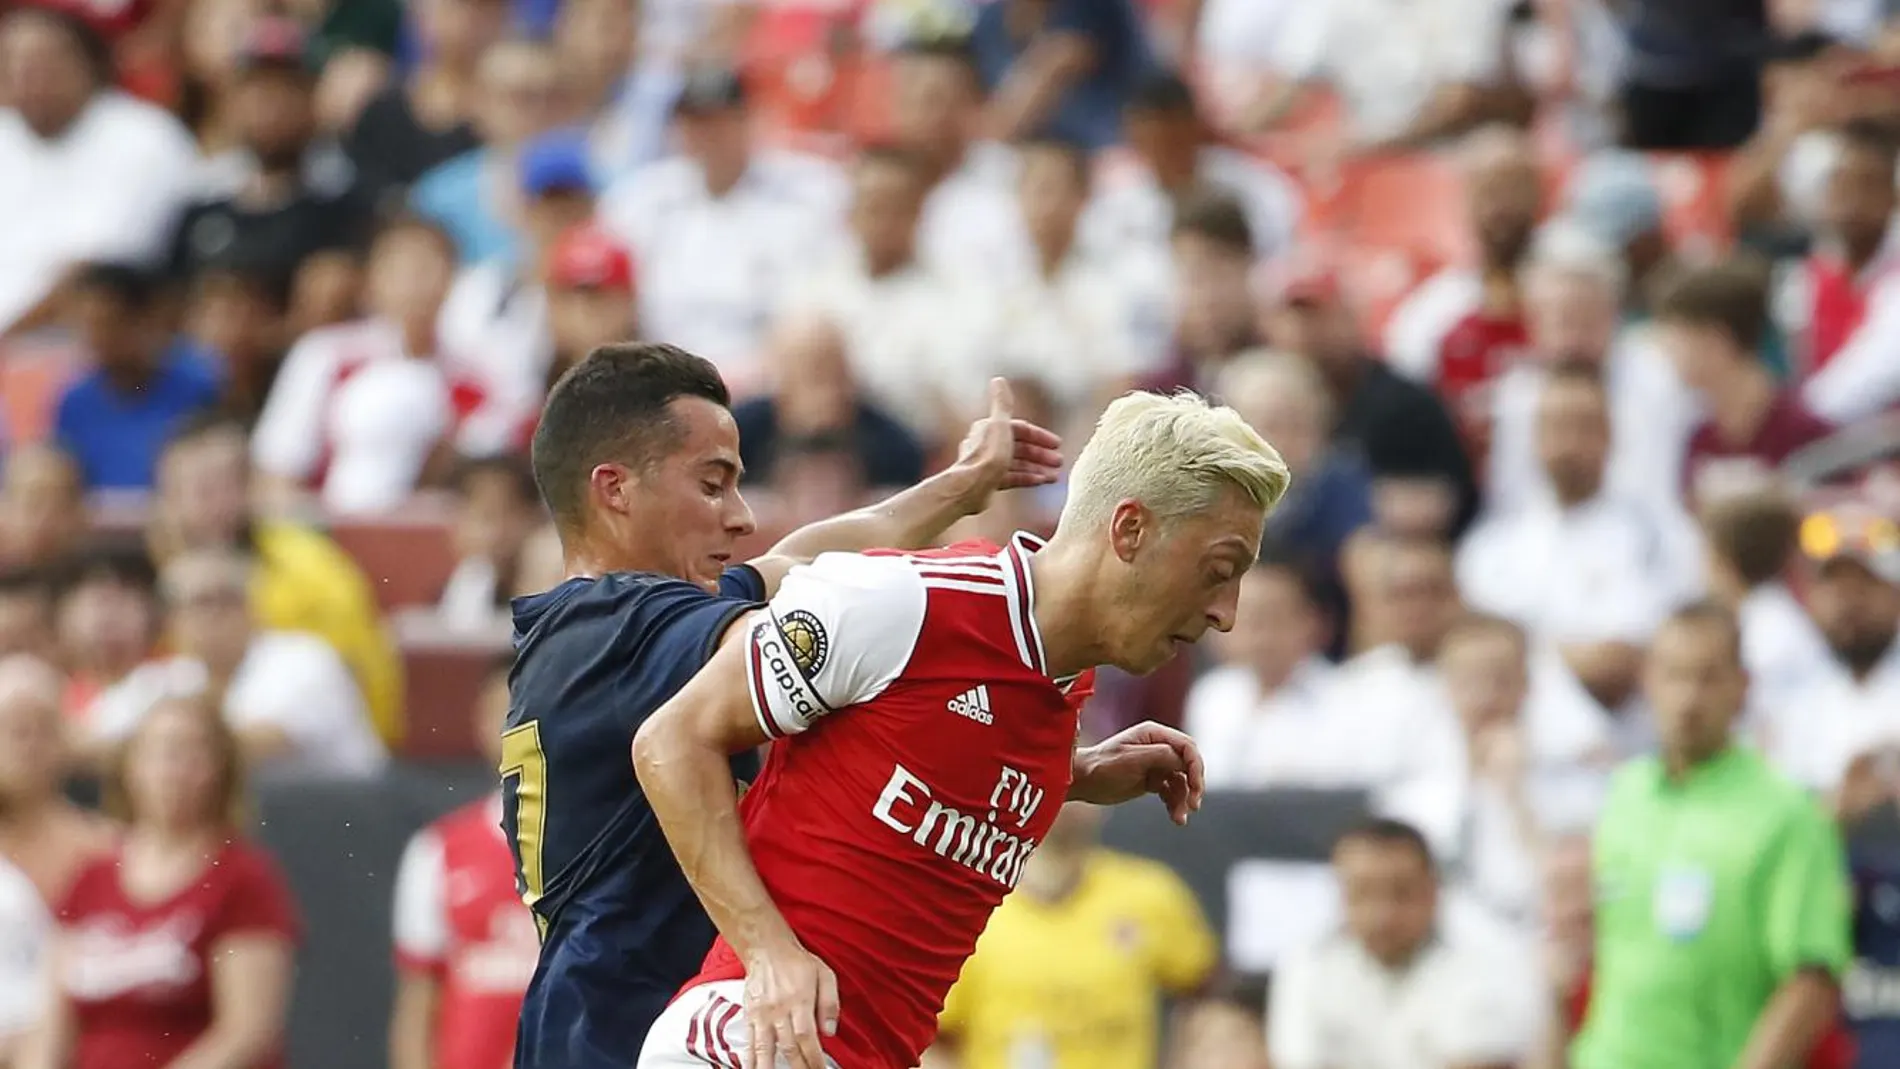 [Mesut Ozil (10) battle for the ball during the first half of a match in the International Champions Cup]